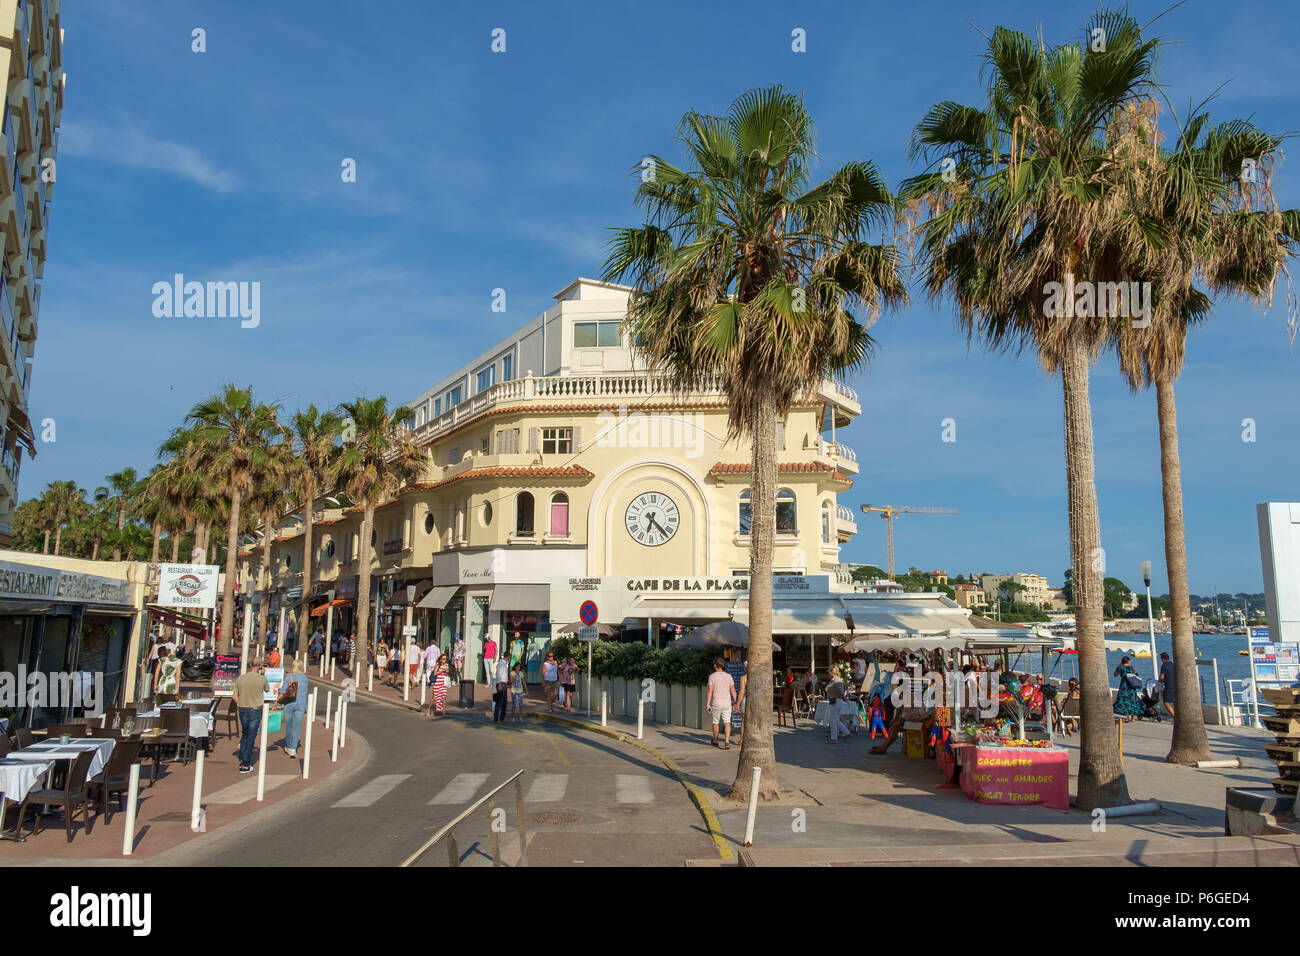 Shops, restaurants and palm trees along the seafront of Juan les Pins,  Antibes, France Stock Photo - Alamy